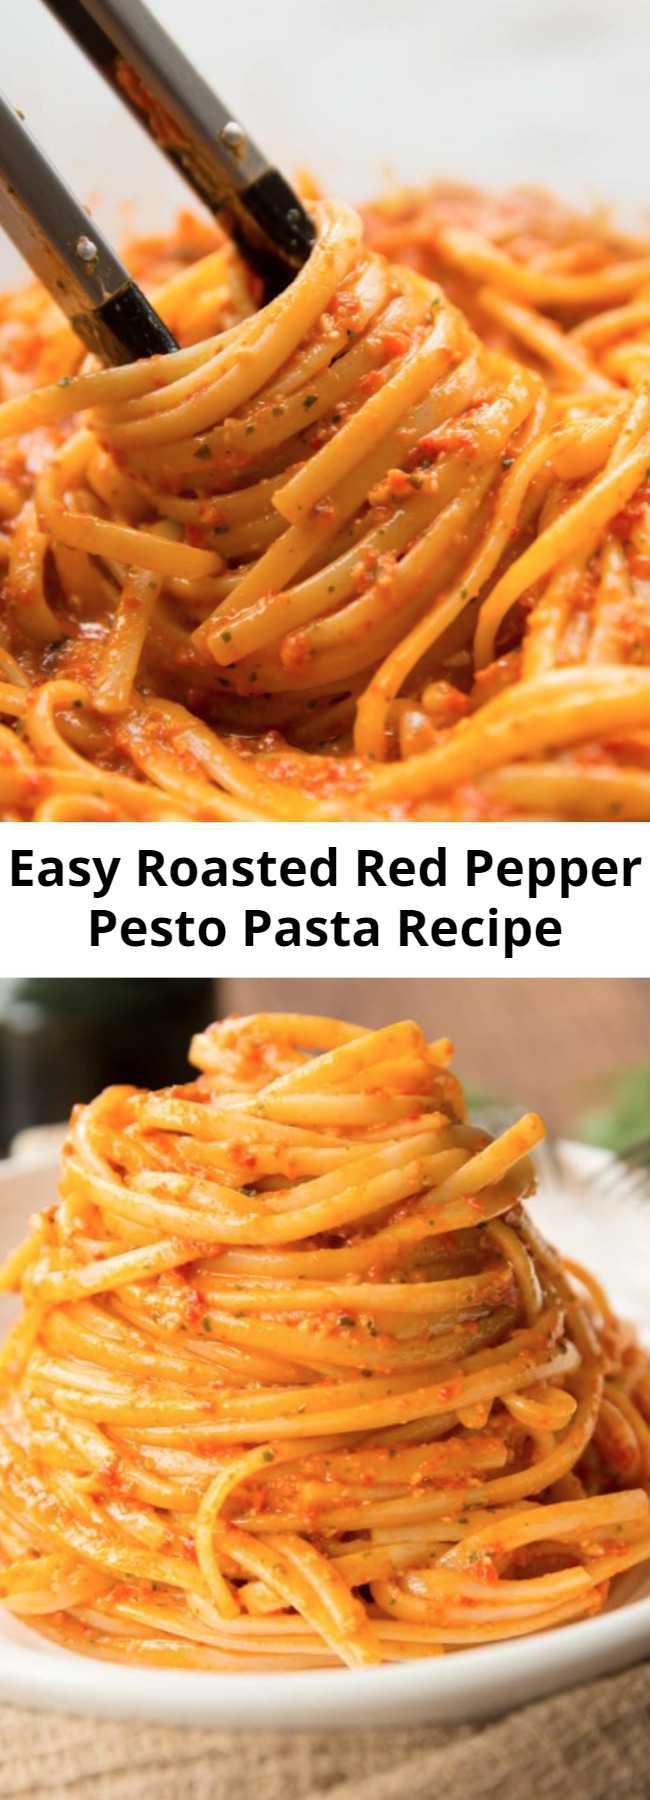 Easy Roasted Red Pepper Pesto Pasta Recipe - This Roasted Red Pepper Pesto Pasta is bursting with flavour and goes down in just 15mins! #redpepper #bellpepper #pesto #pasta